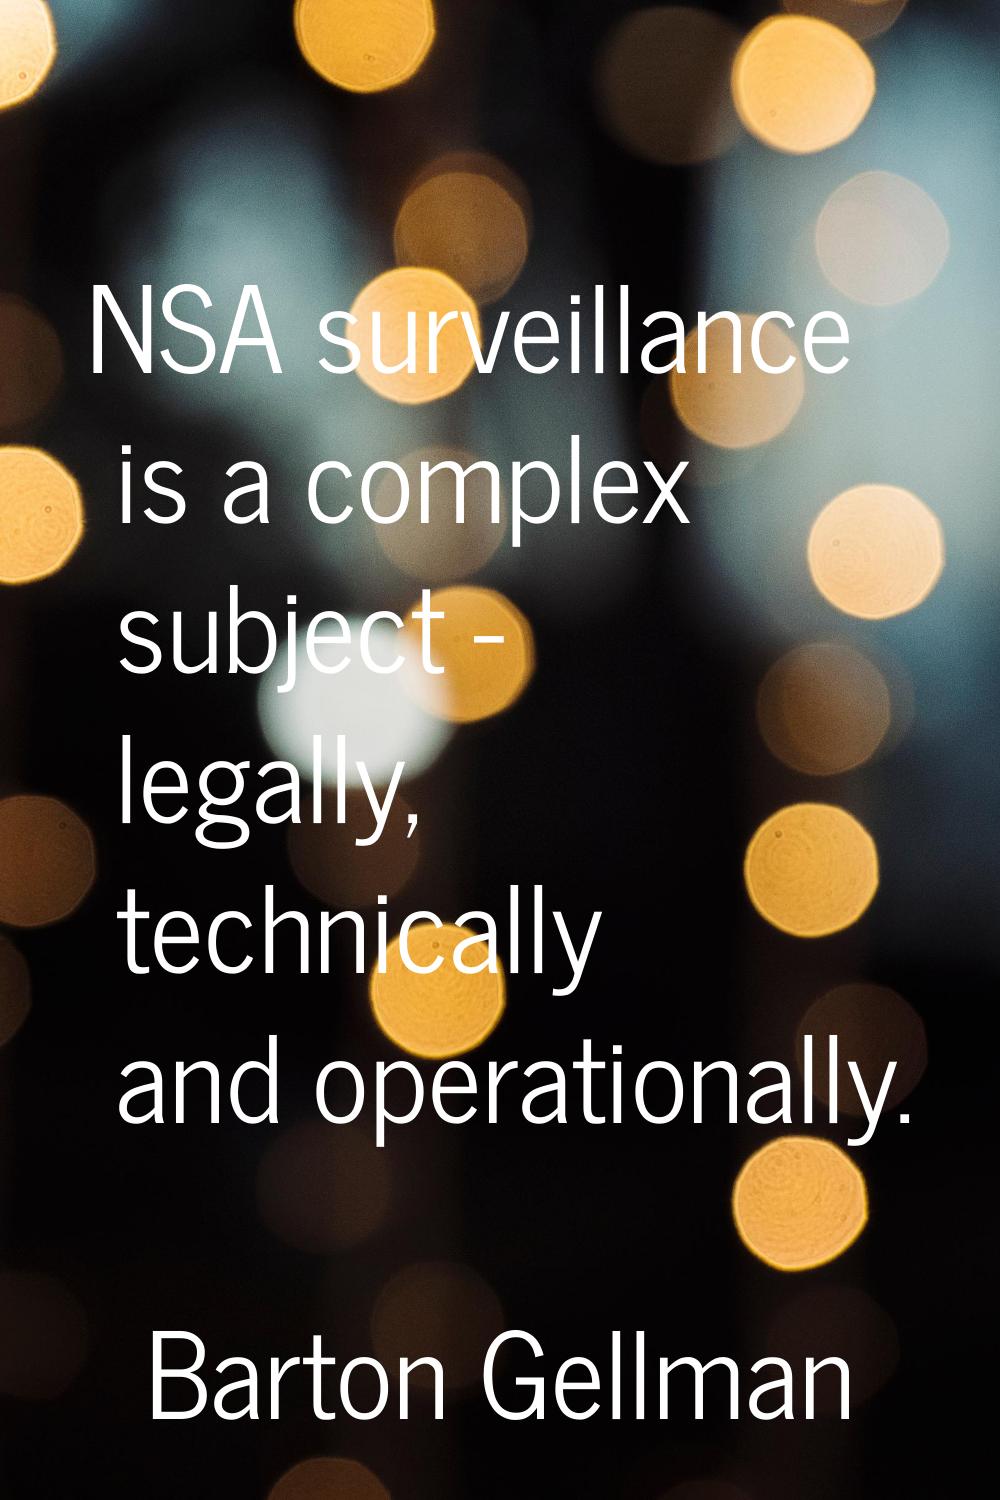 NSA surveillance is a complex subject - legally, technically and operationally.